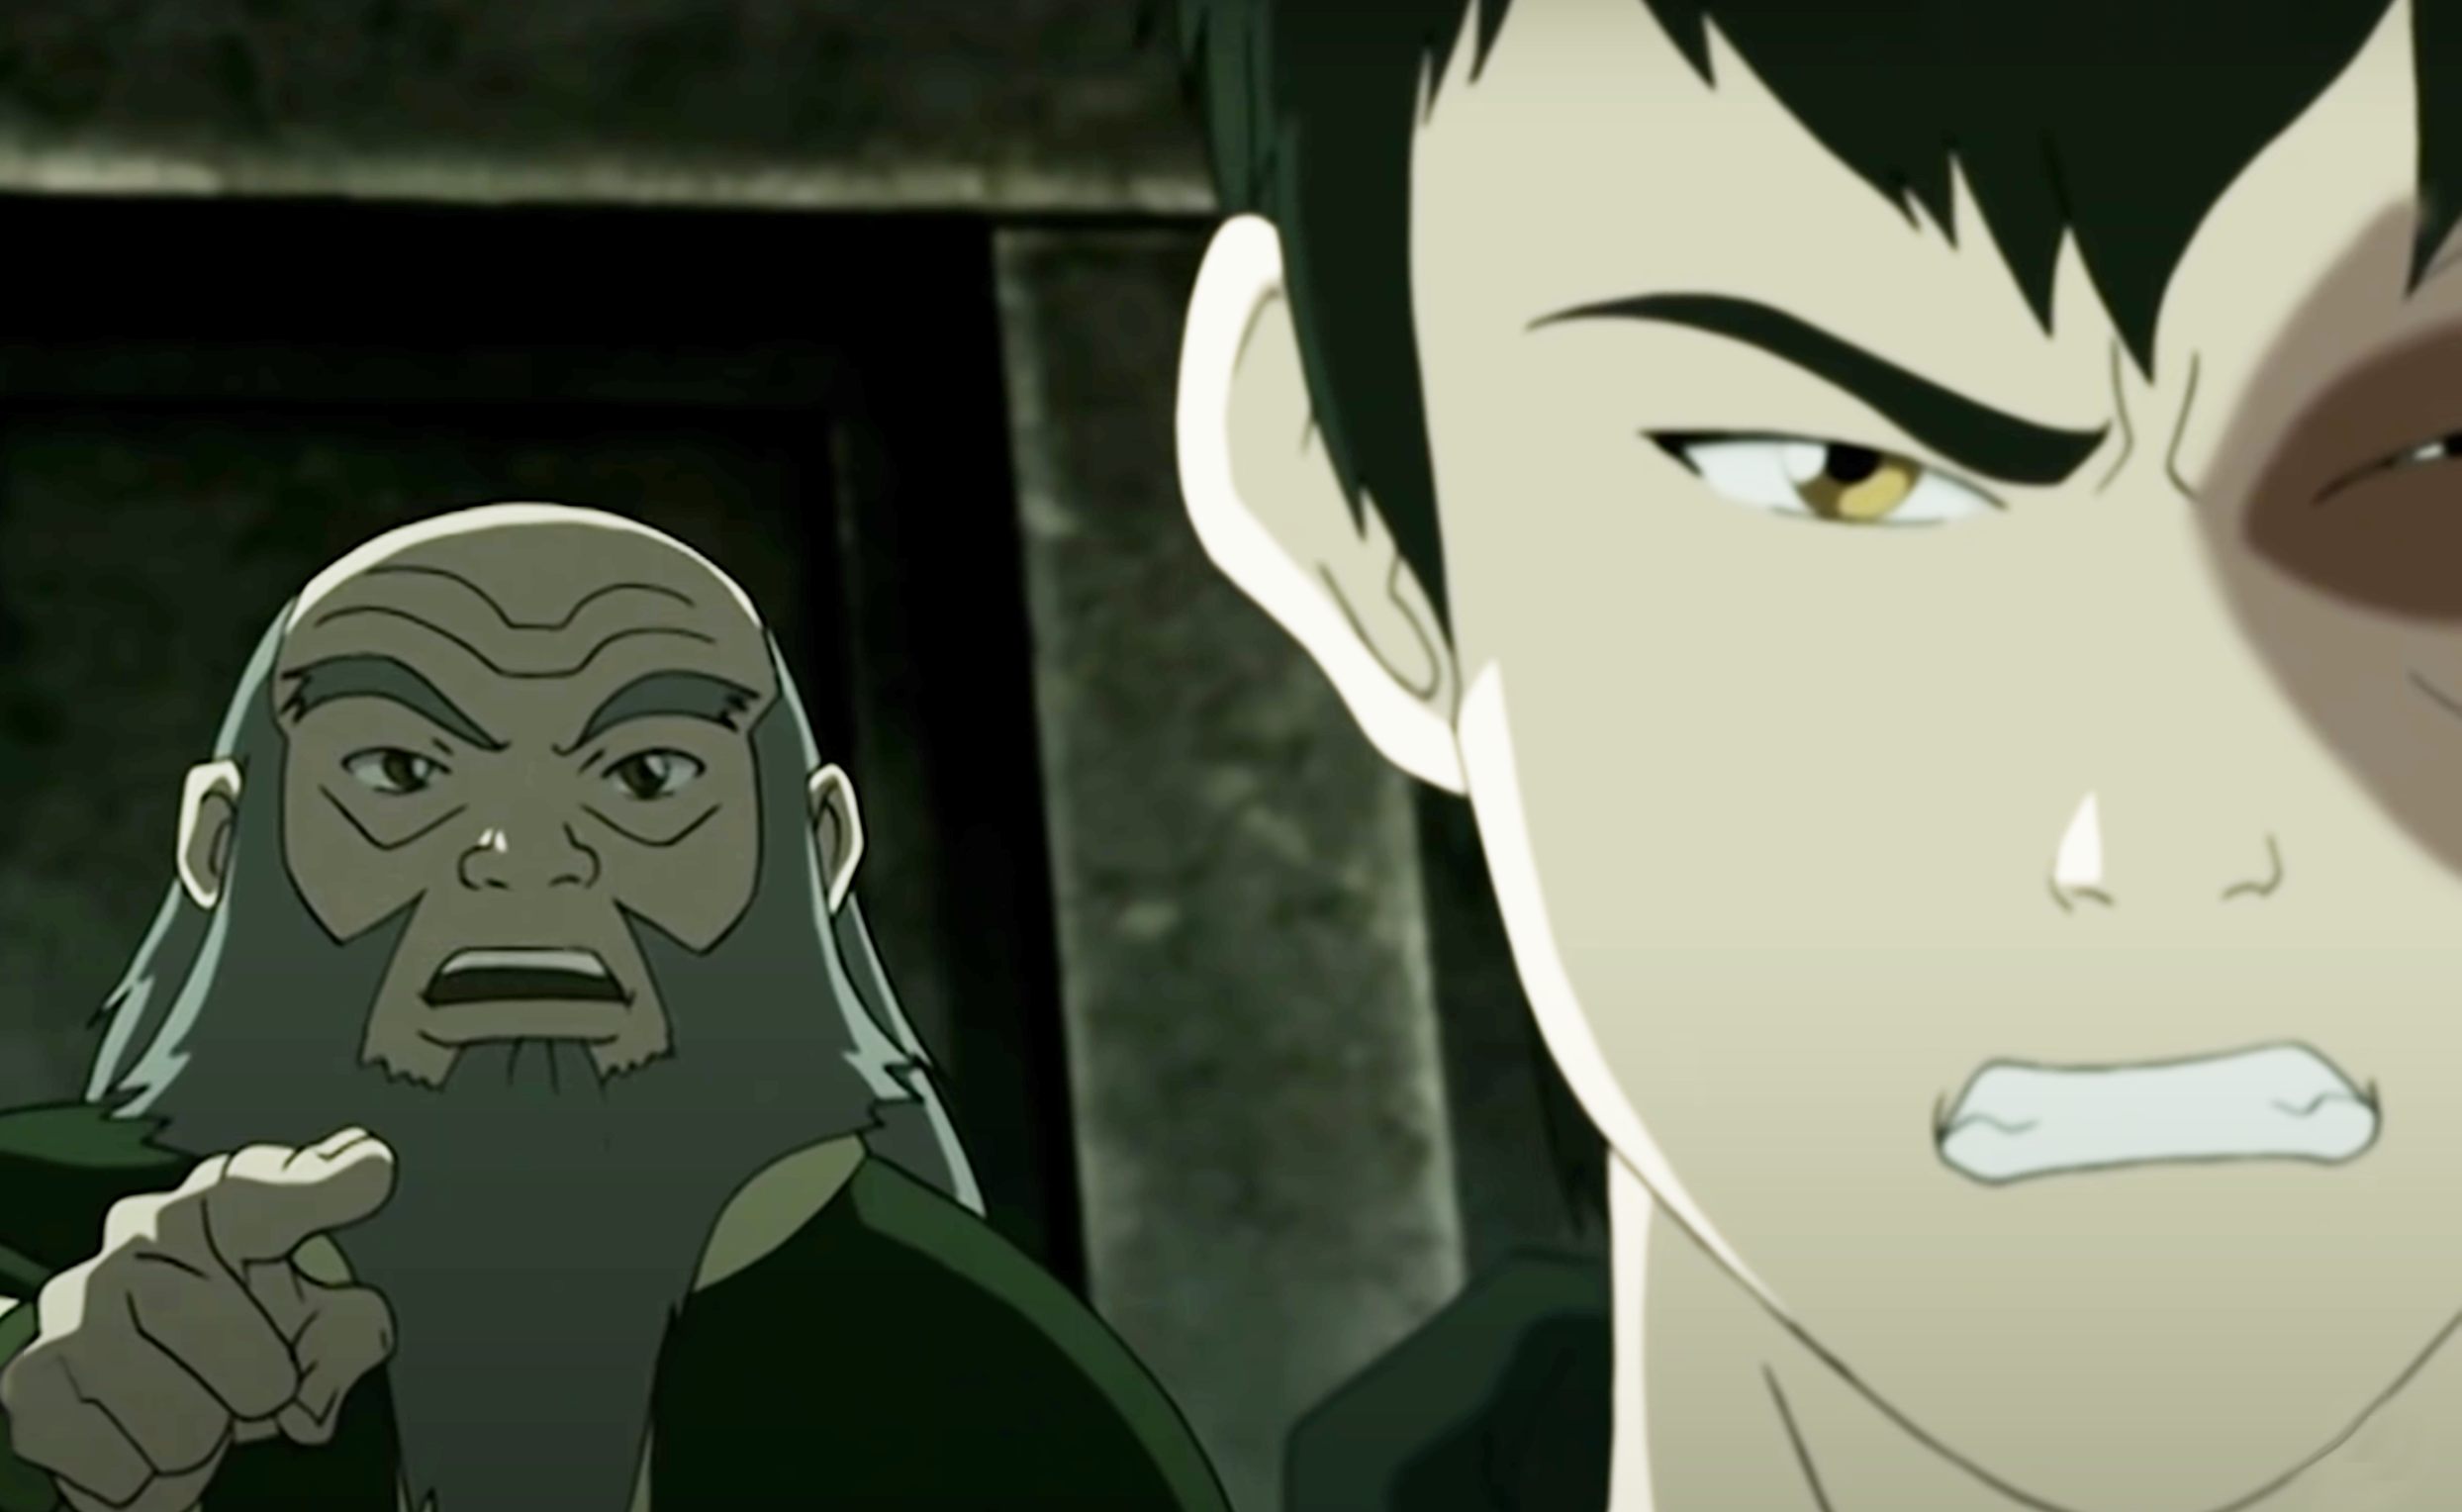 Iroh speaking with tough love to Zuko who is planning on doing something he feels pressured to do